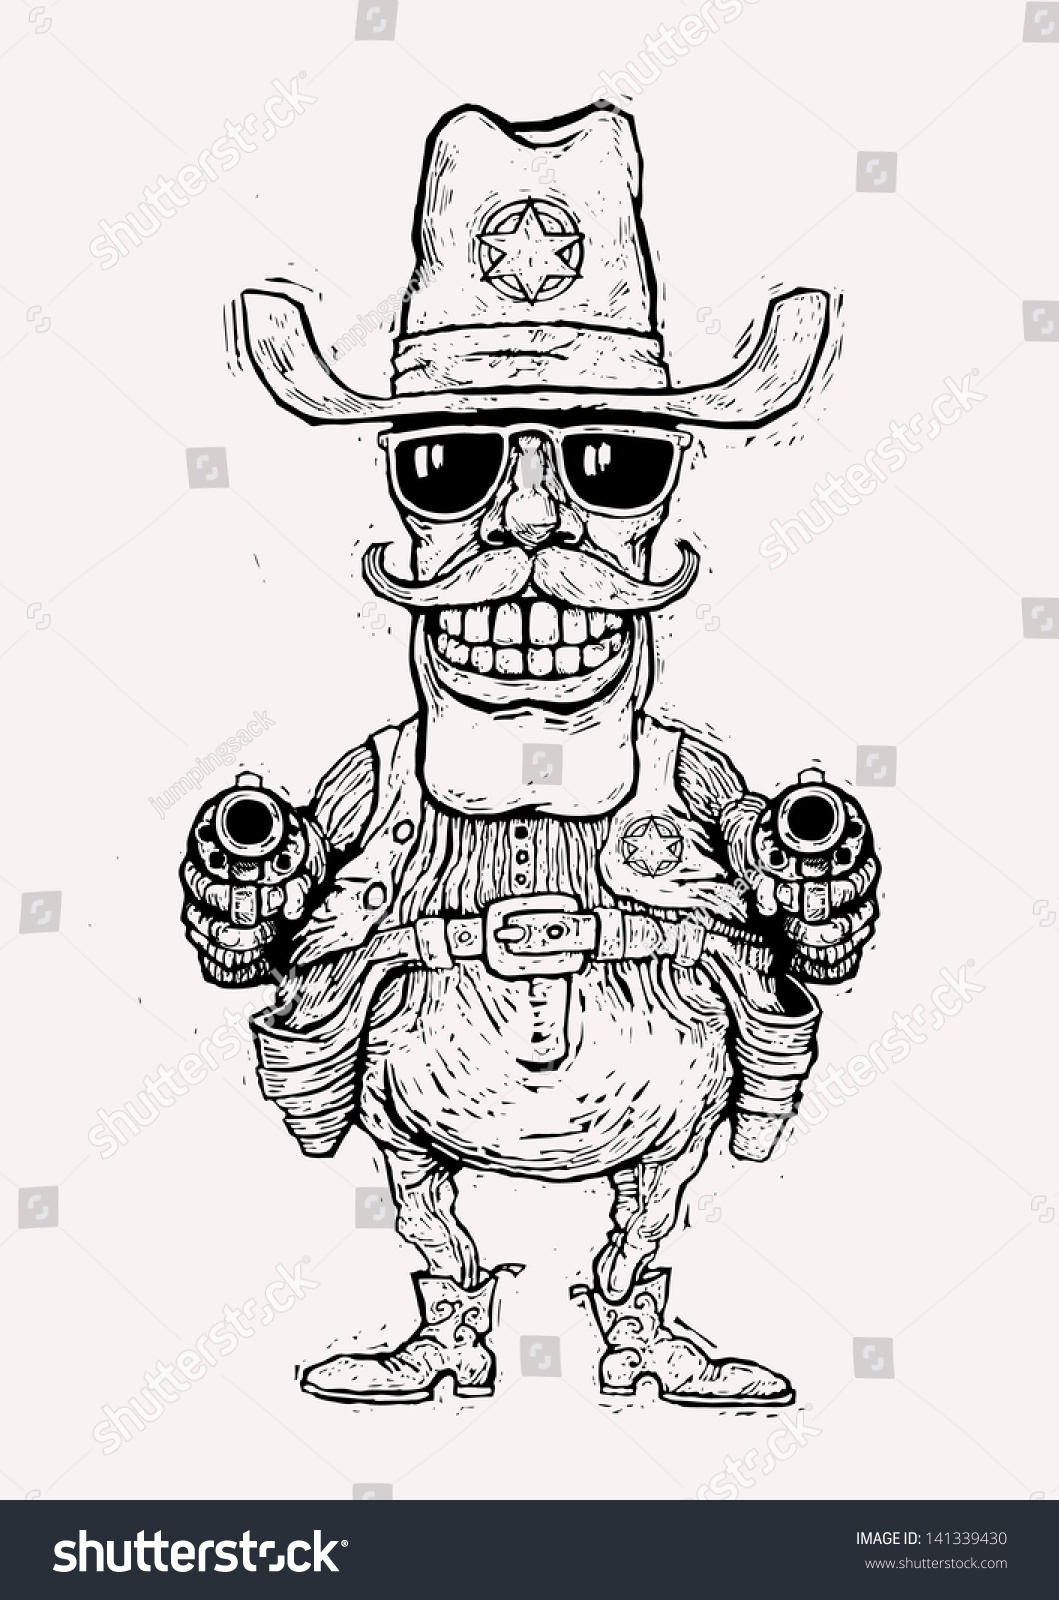 Sheriff smiling with two revolvers. funny character. linocut style. vector illustration #141339430